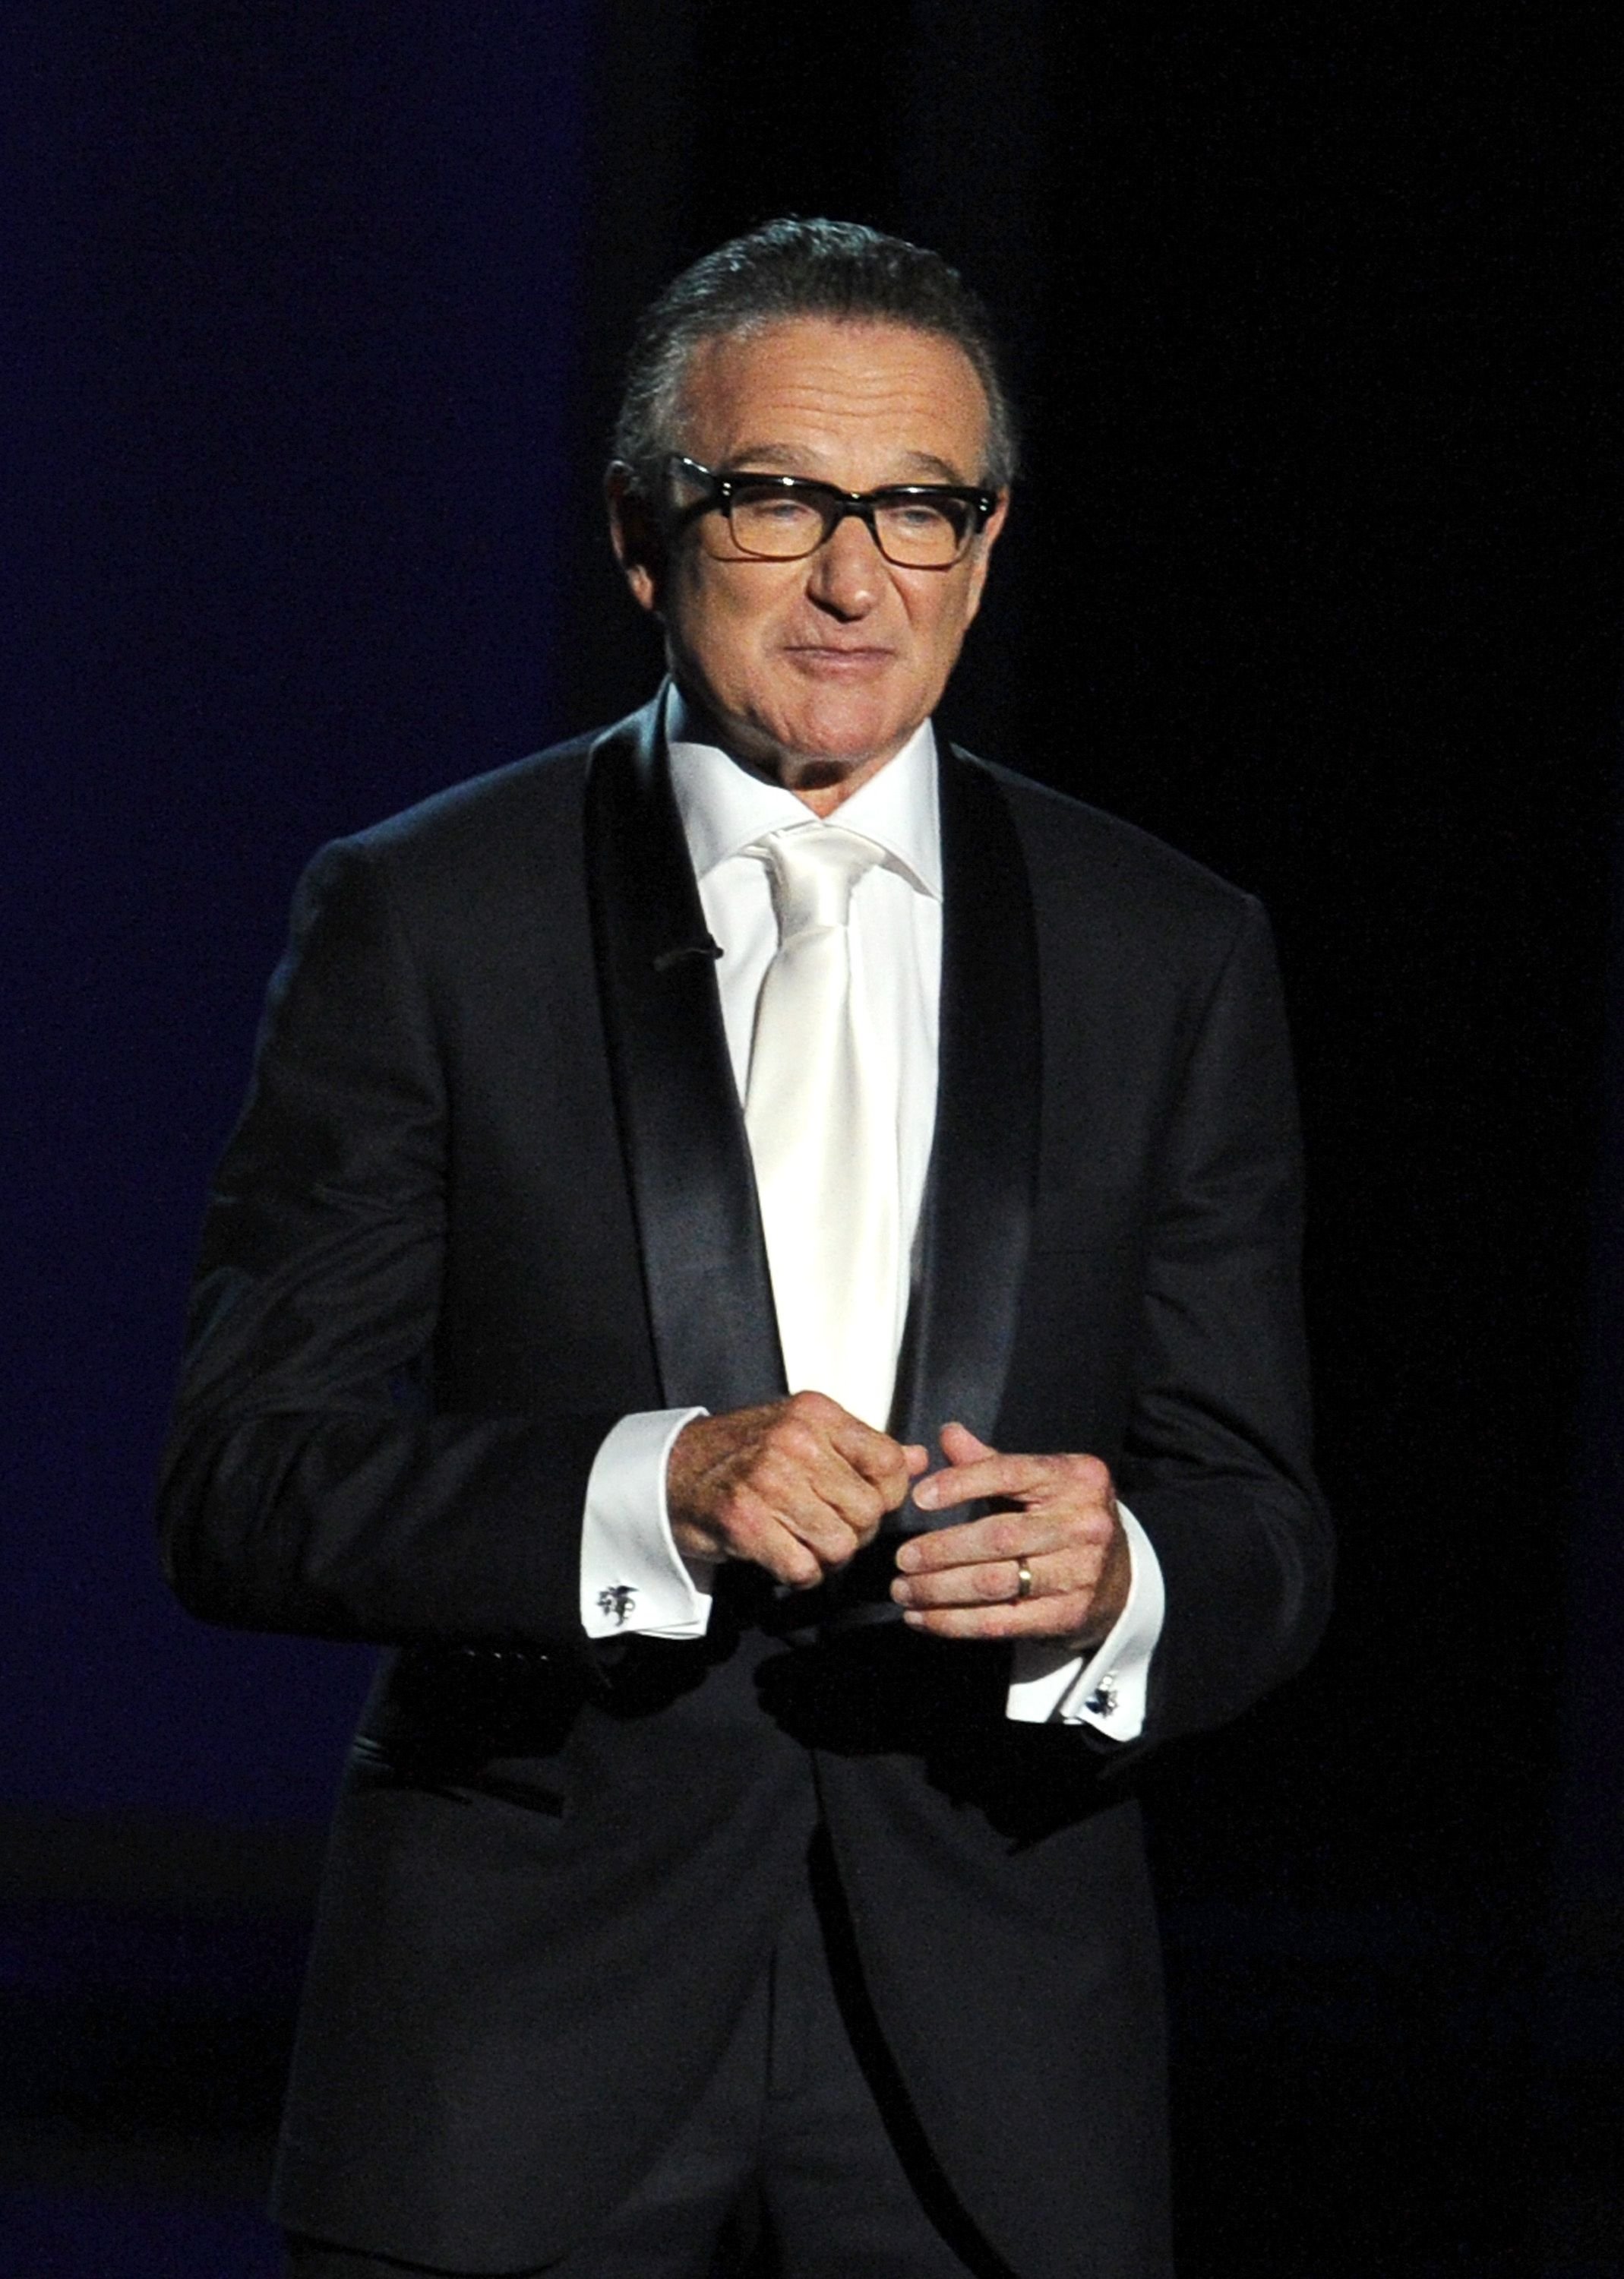 Robin Williams spoke at the 65th Annual Primetime Emmy Awards held at Nokia Theatre L.A. Live on September 22, 2013 | Photo: Getty Images